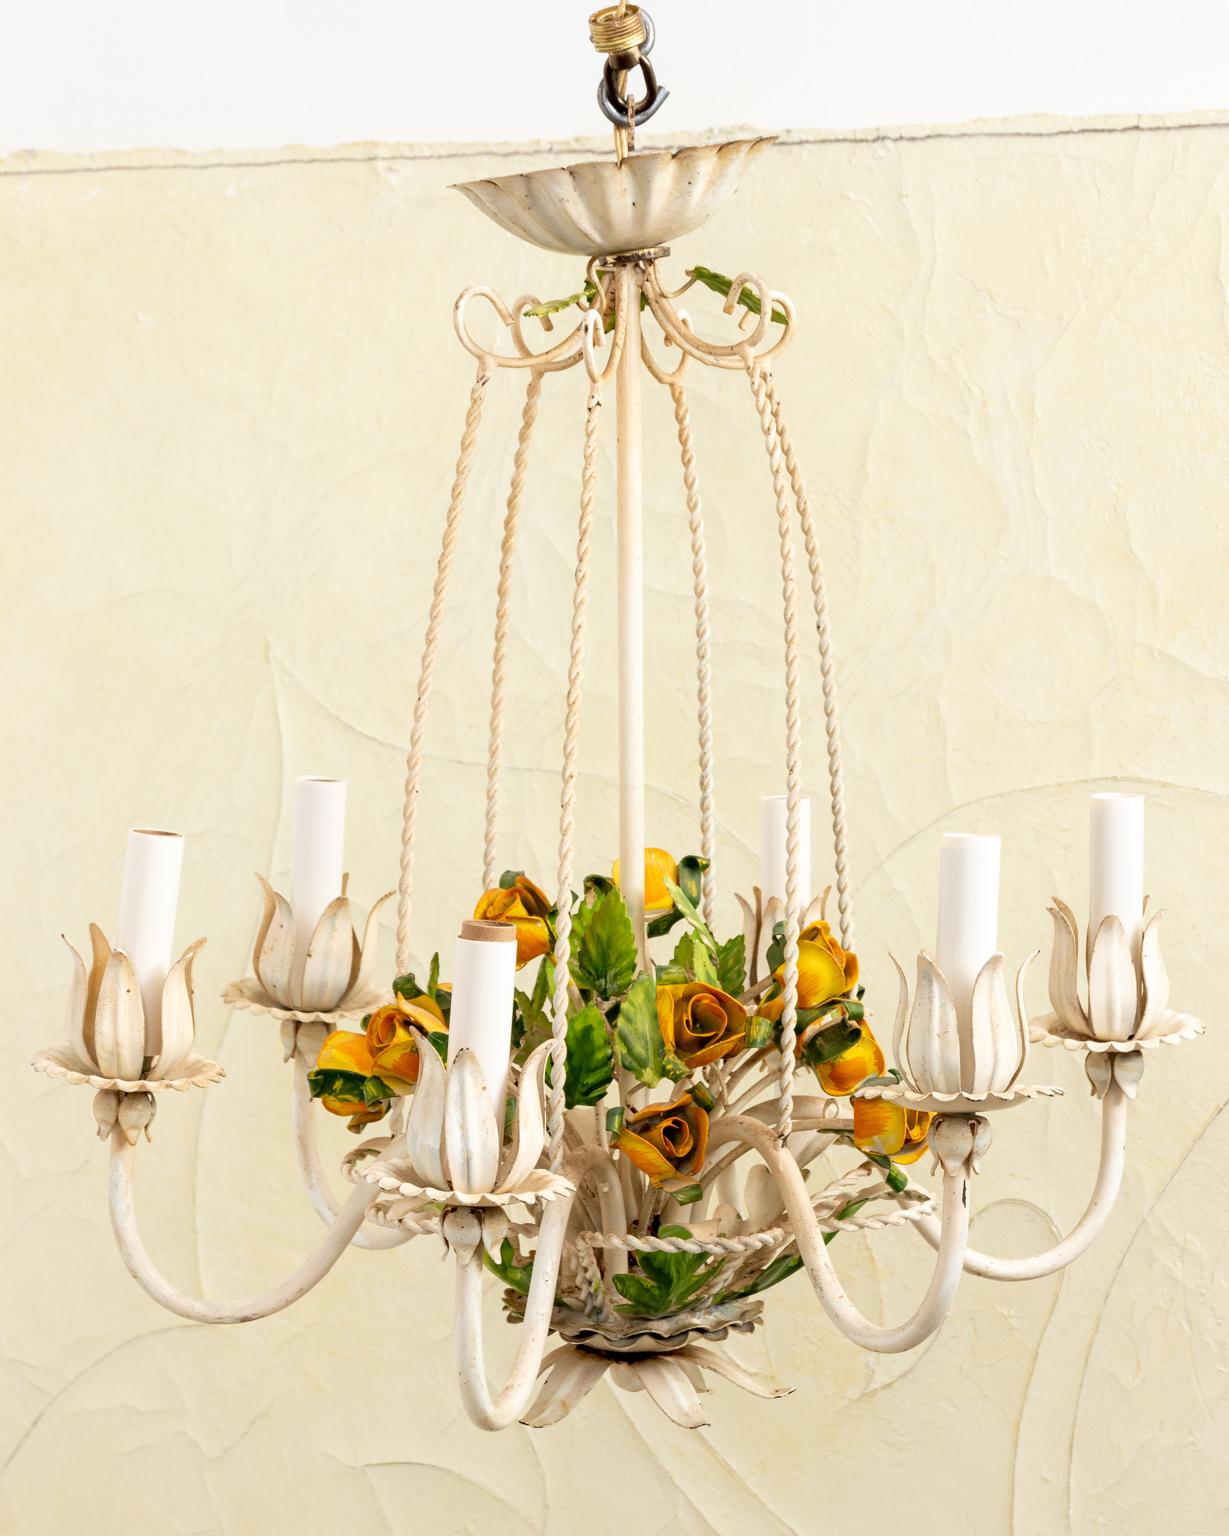 20th Century Italian Tole Floral Chandelier with Roses